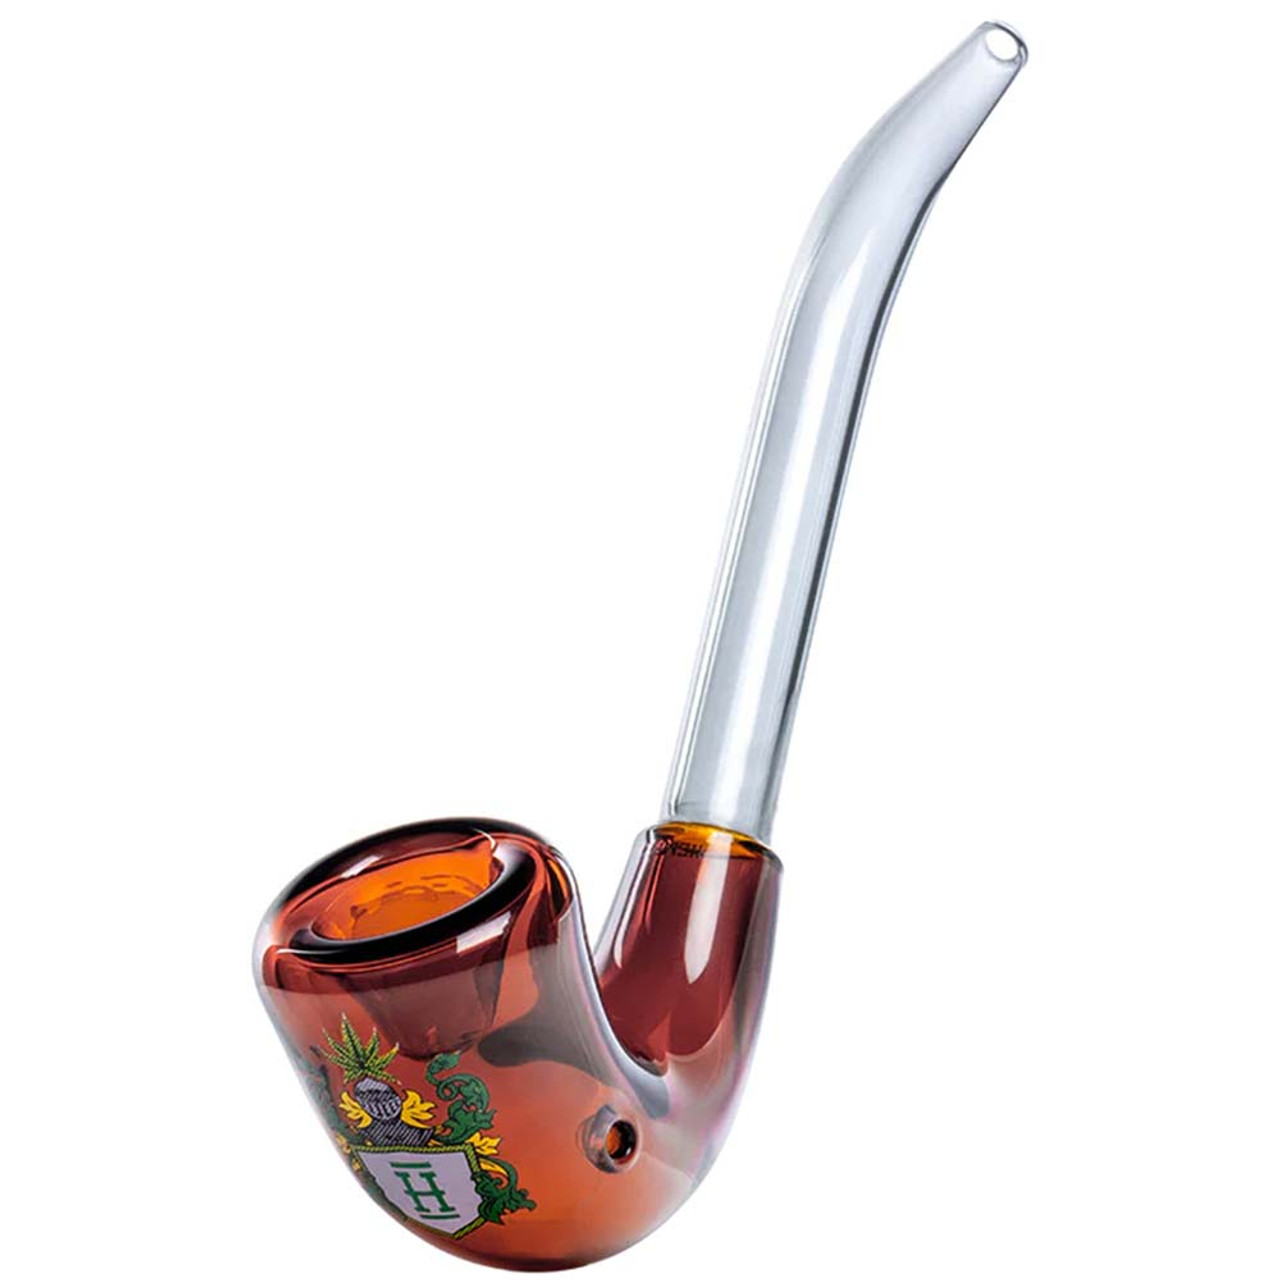 How to clean your glass pipe - HEMPER